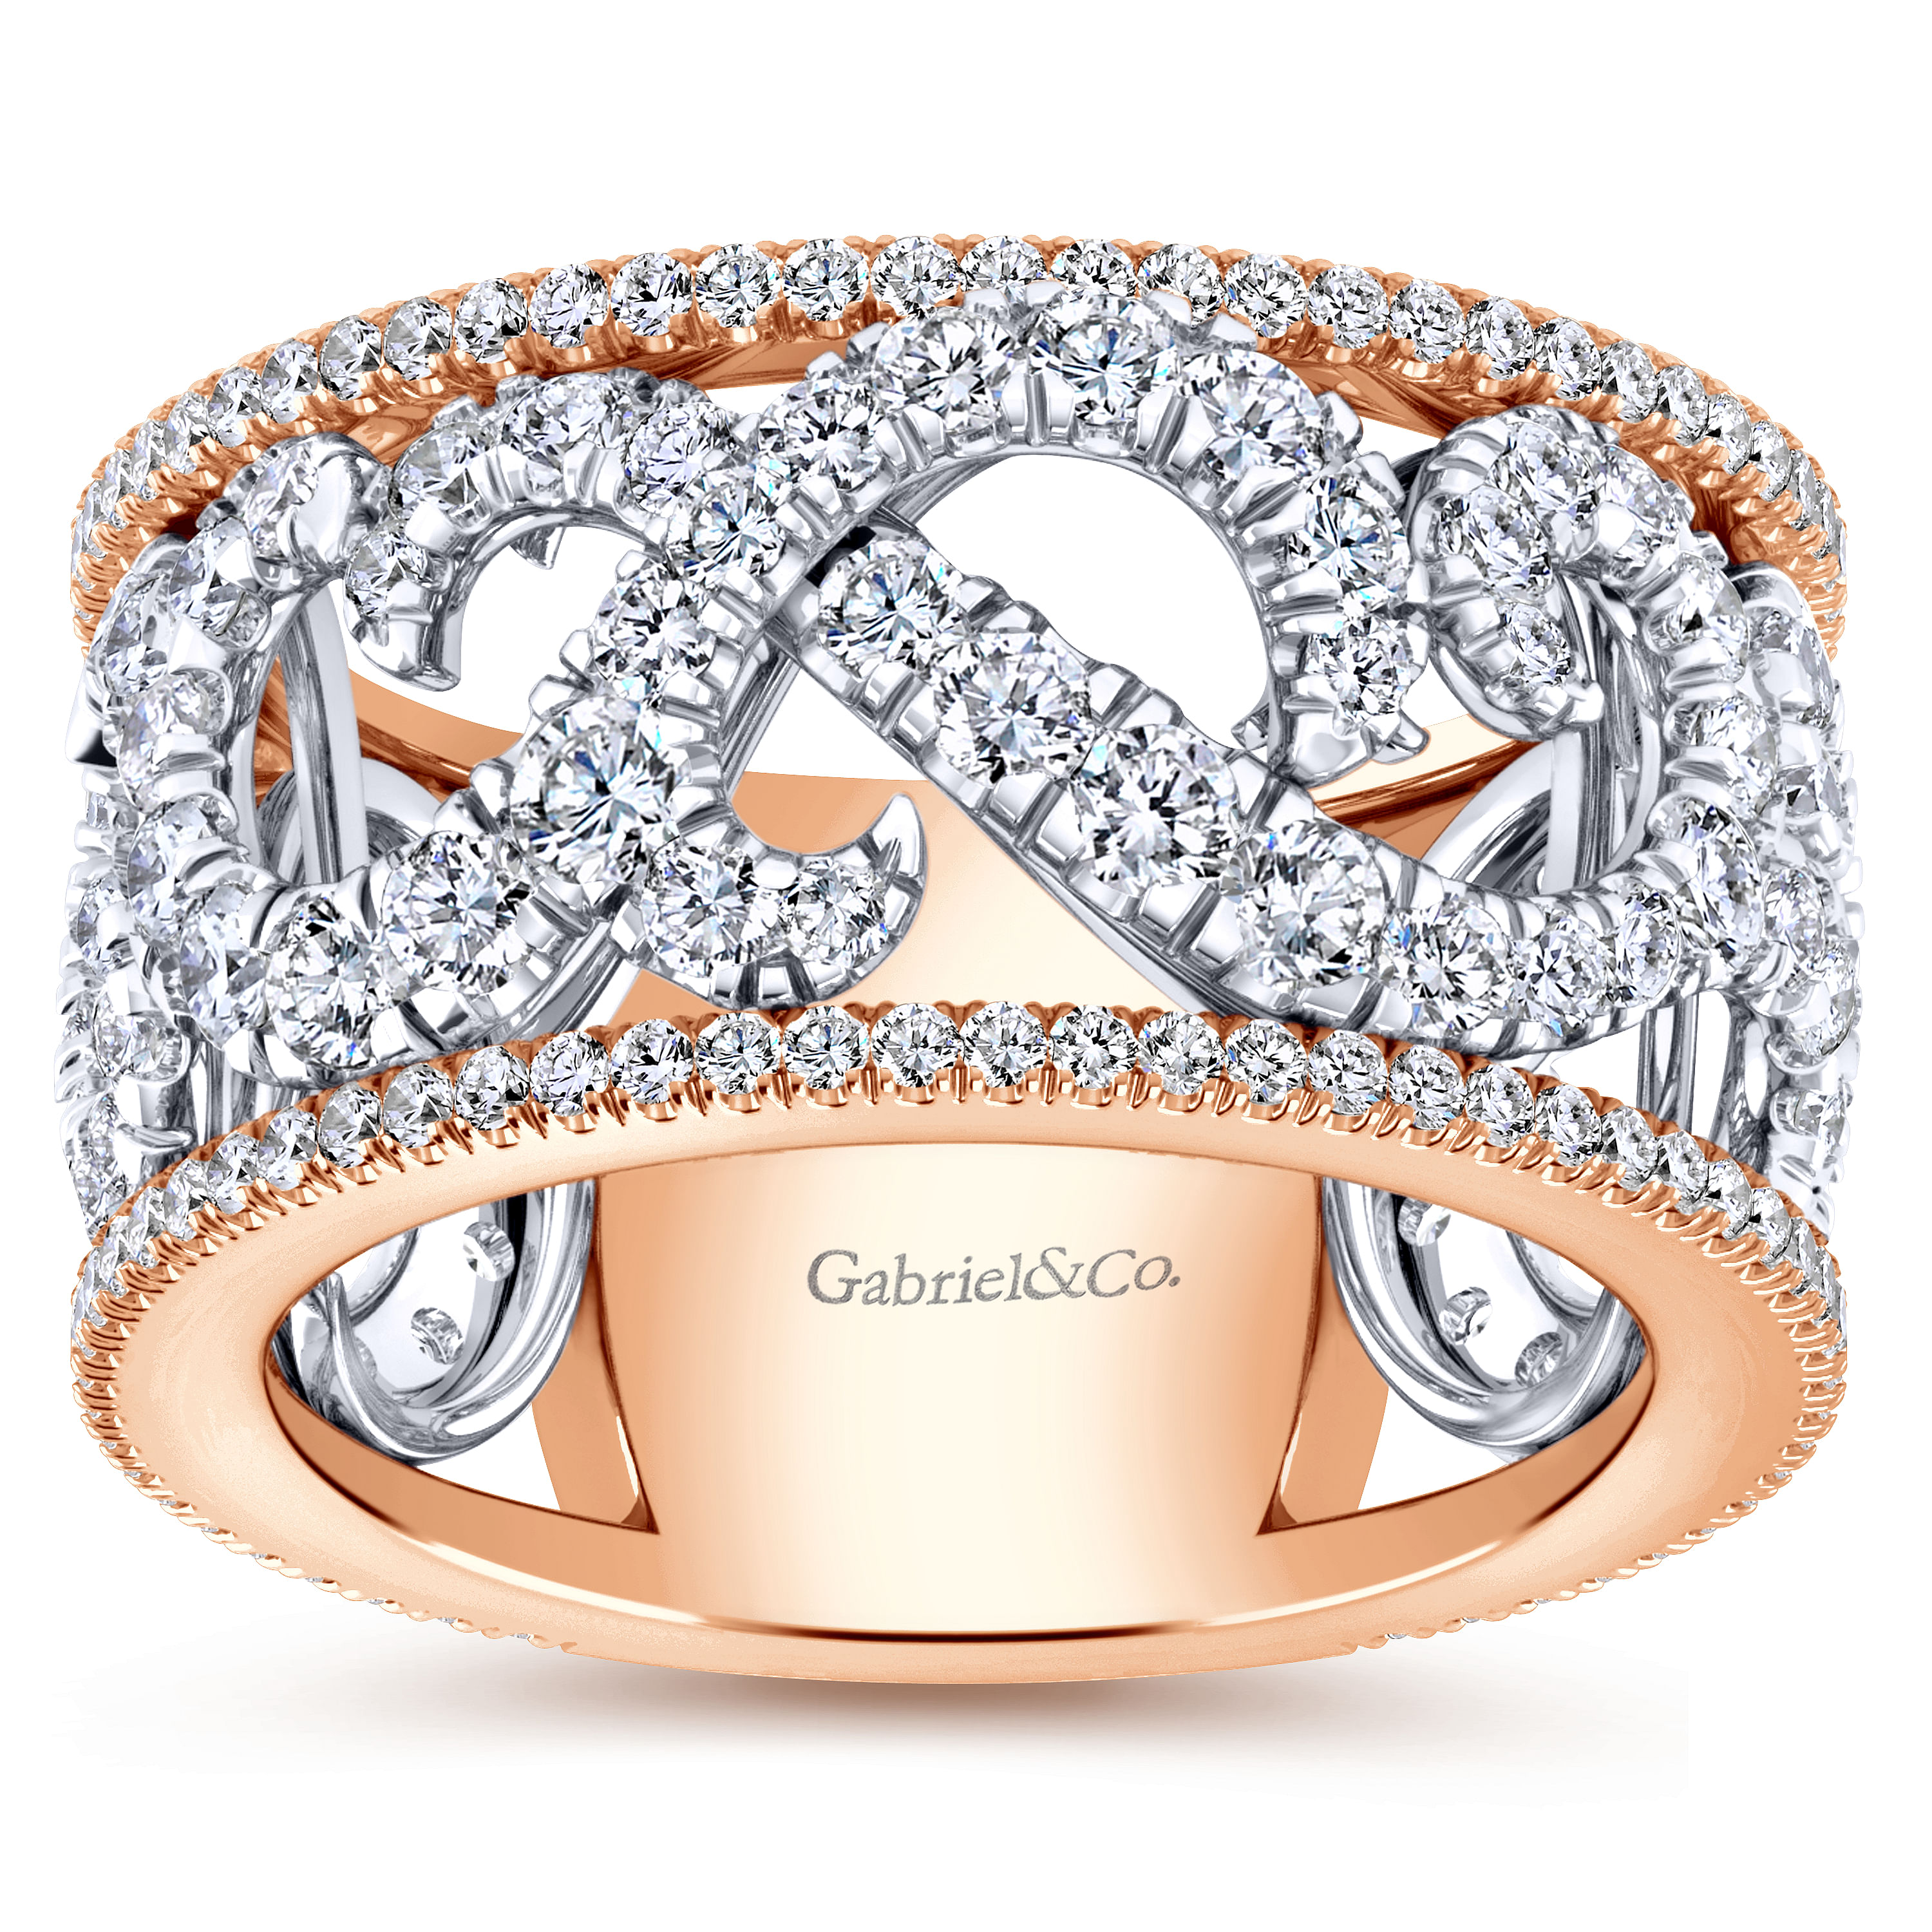 Wide 14K White and Rose Gold French Pavé Set Scrollwork Design Diamond Ring